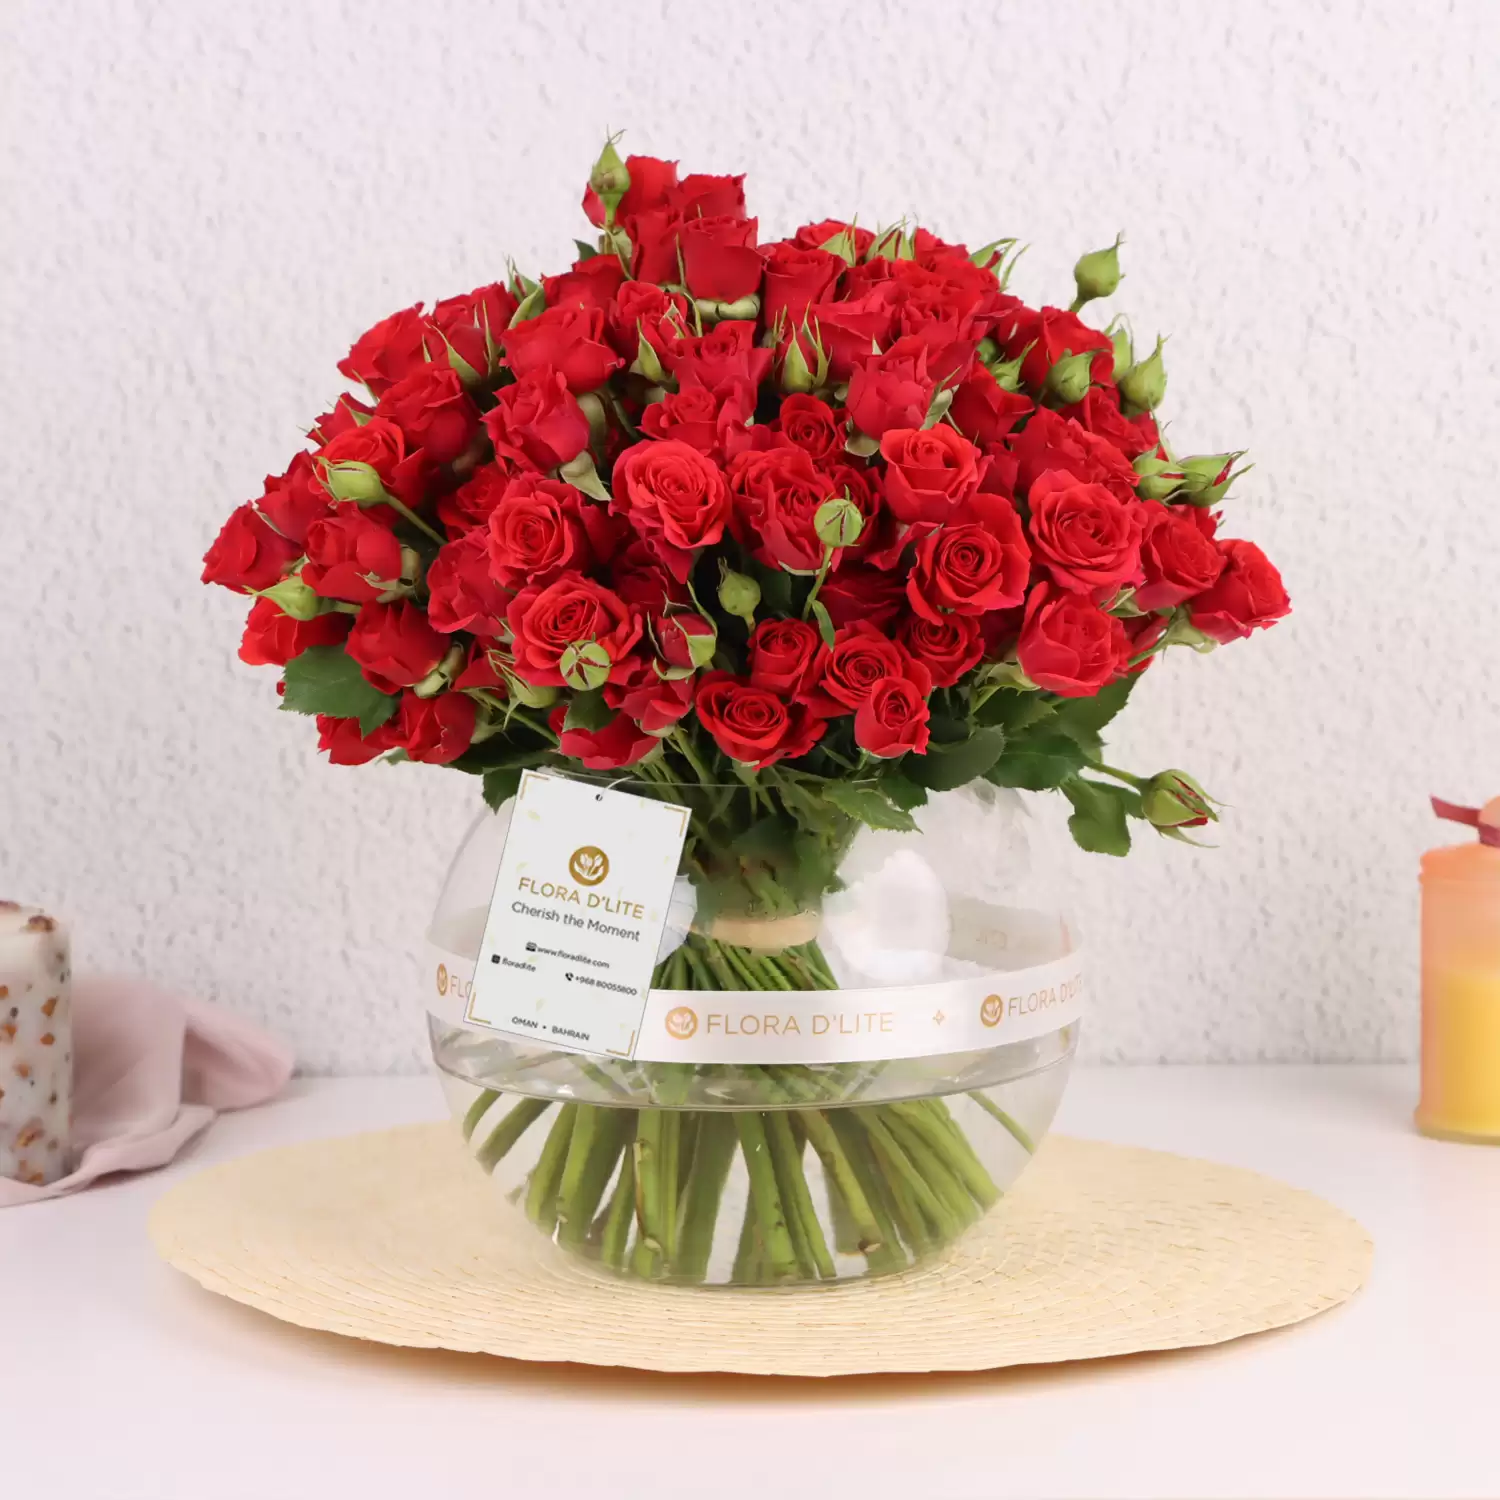 Blooming Romance | Red Flowers Bahrain | Valentine's Day Gifts - Flora D'lite